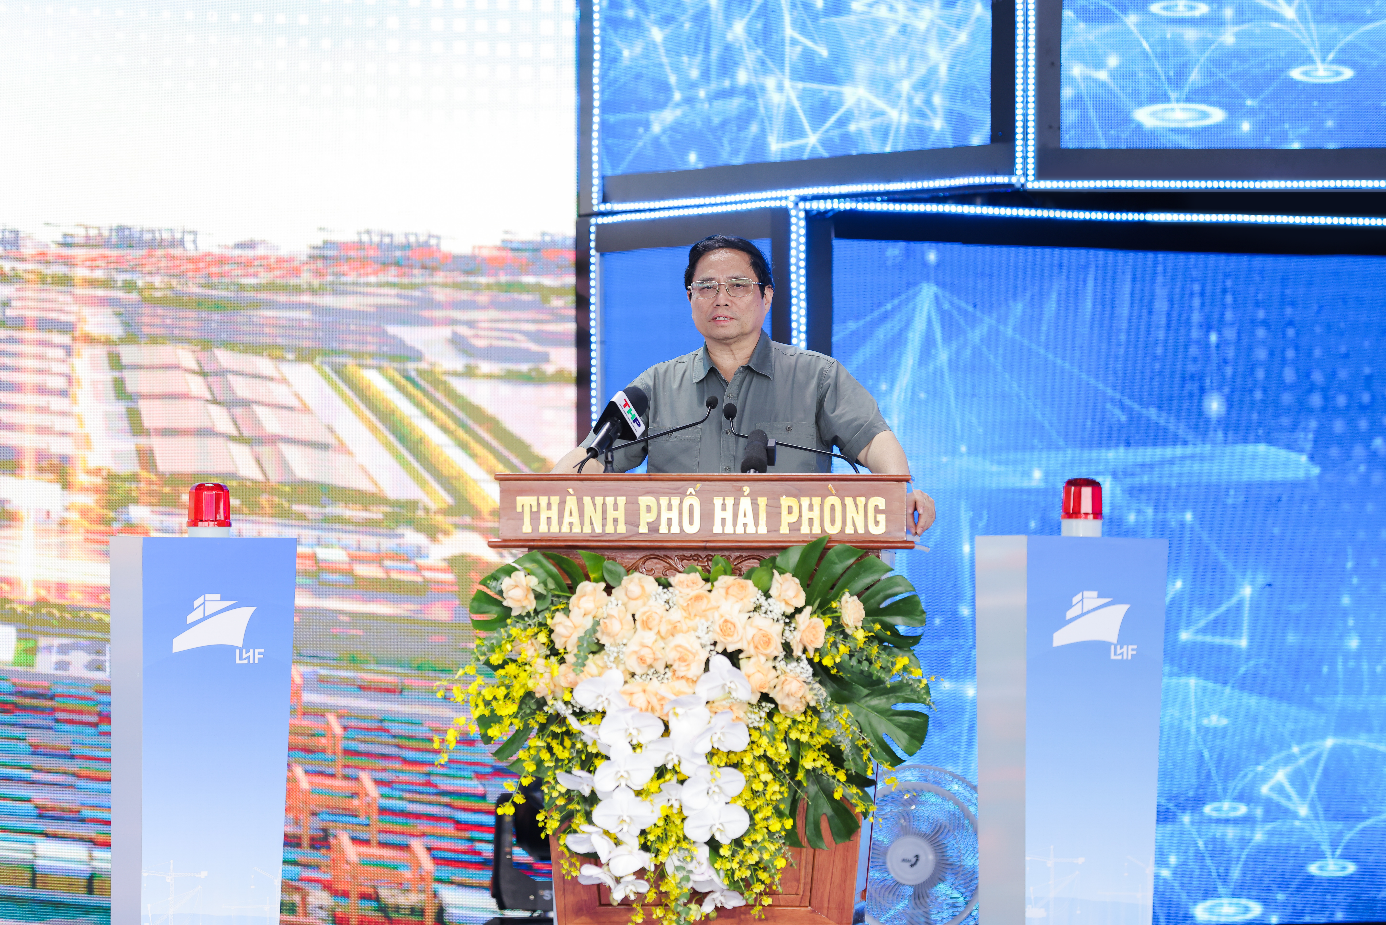 Flagship non-tariff, logistics, and industrial zone project kicks-off in Haiphong